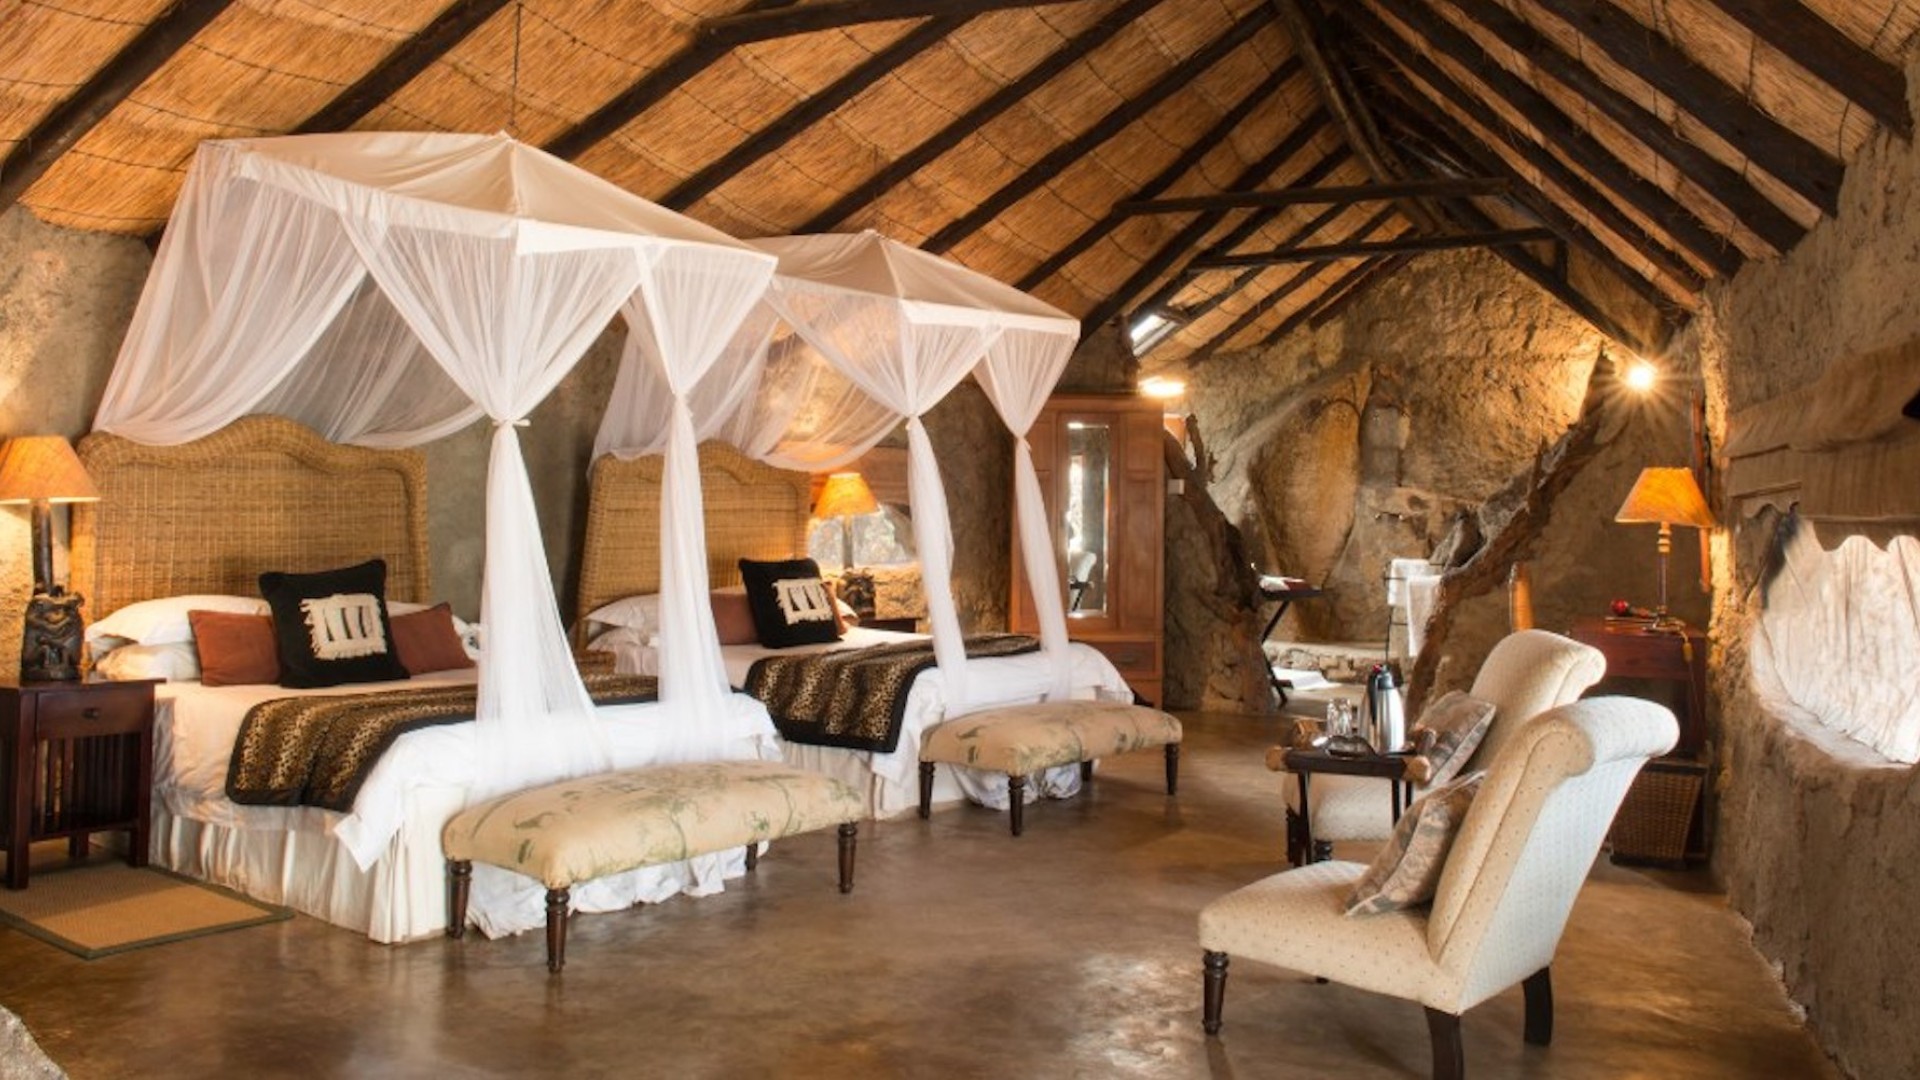 Cement room with two double beds at a safari lodge in Zimbabwe